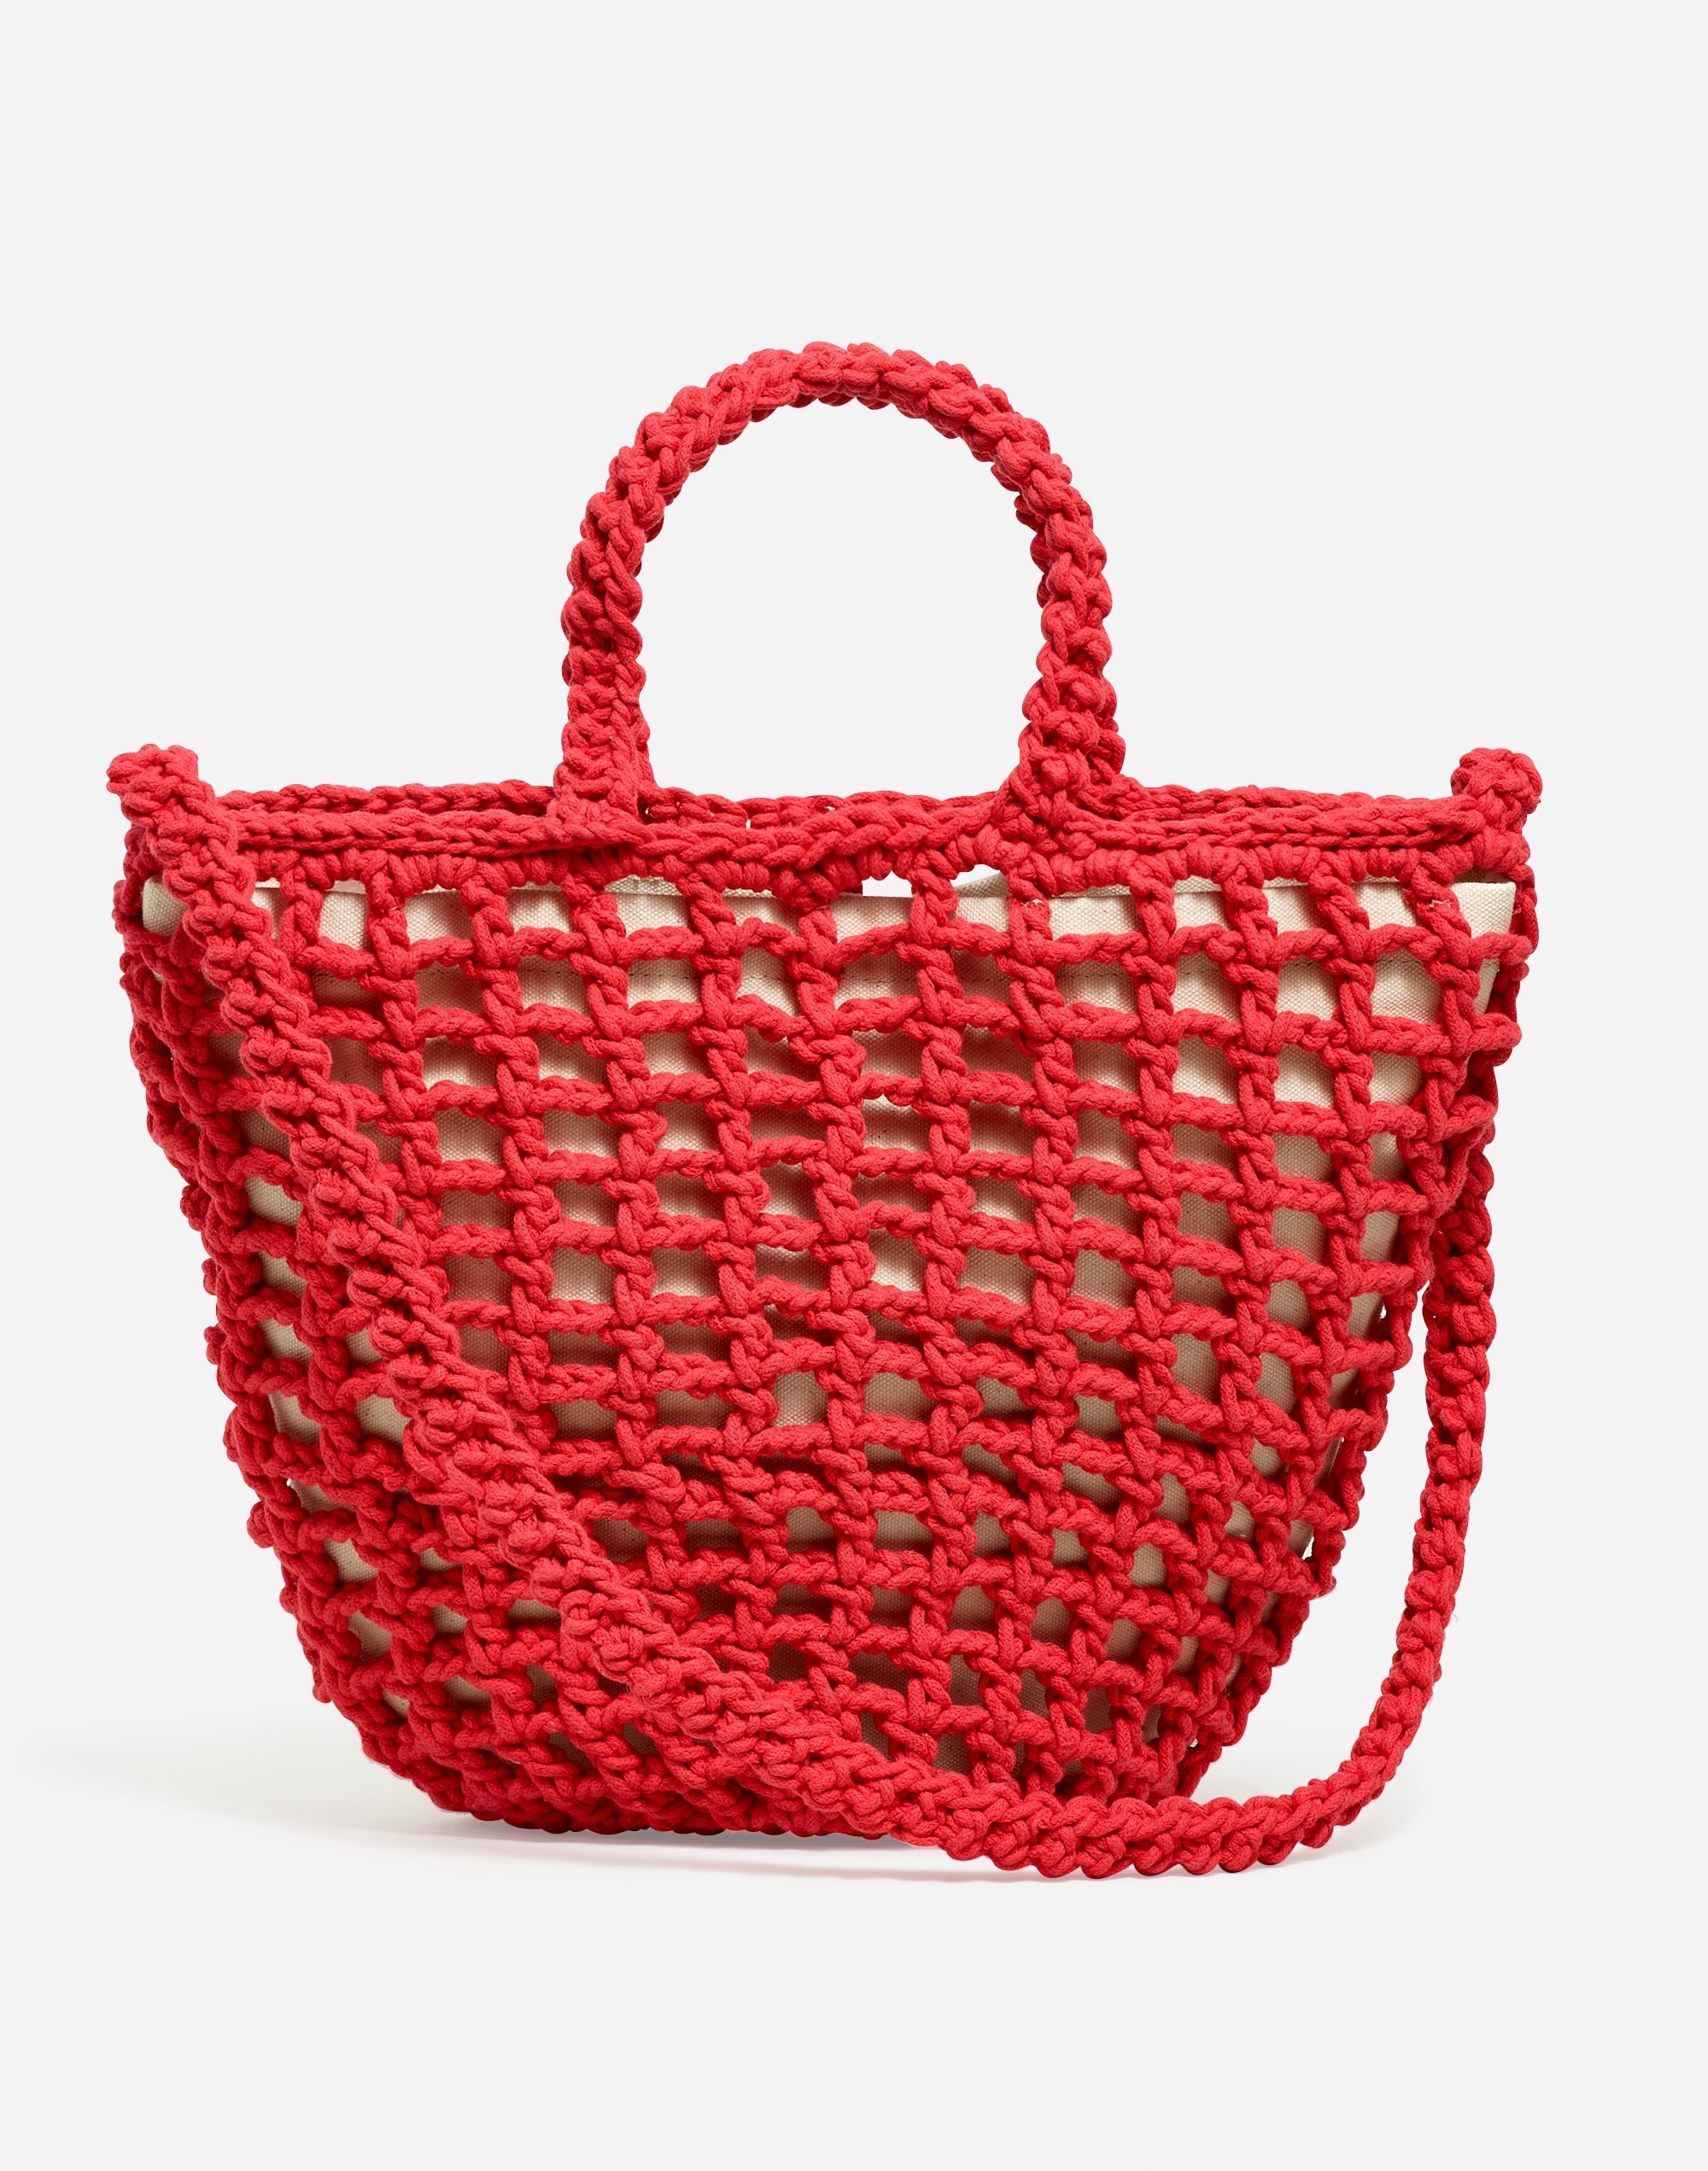 Mw The Crocheted Shoulder Bag In Bright Poppy